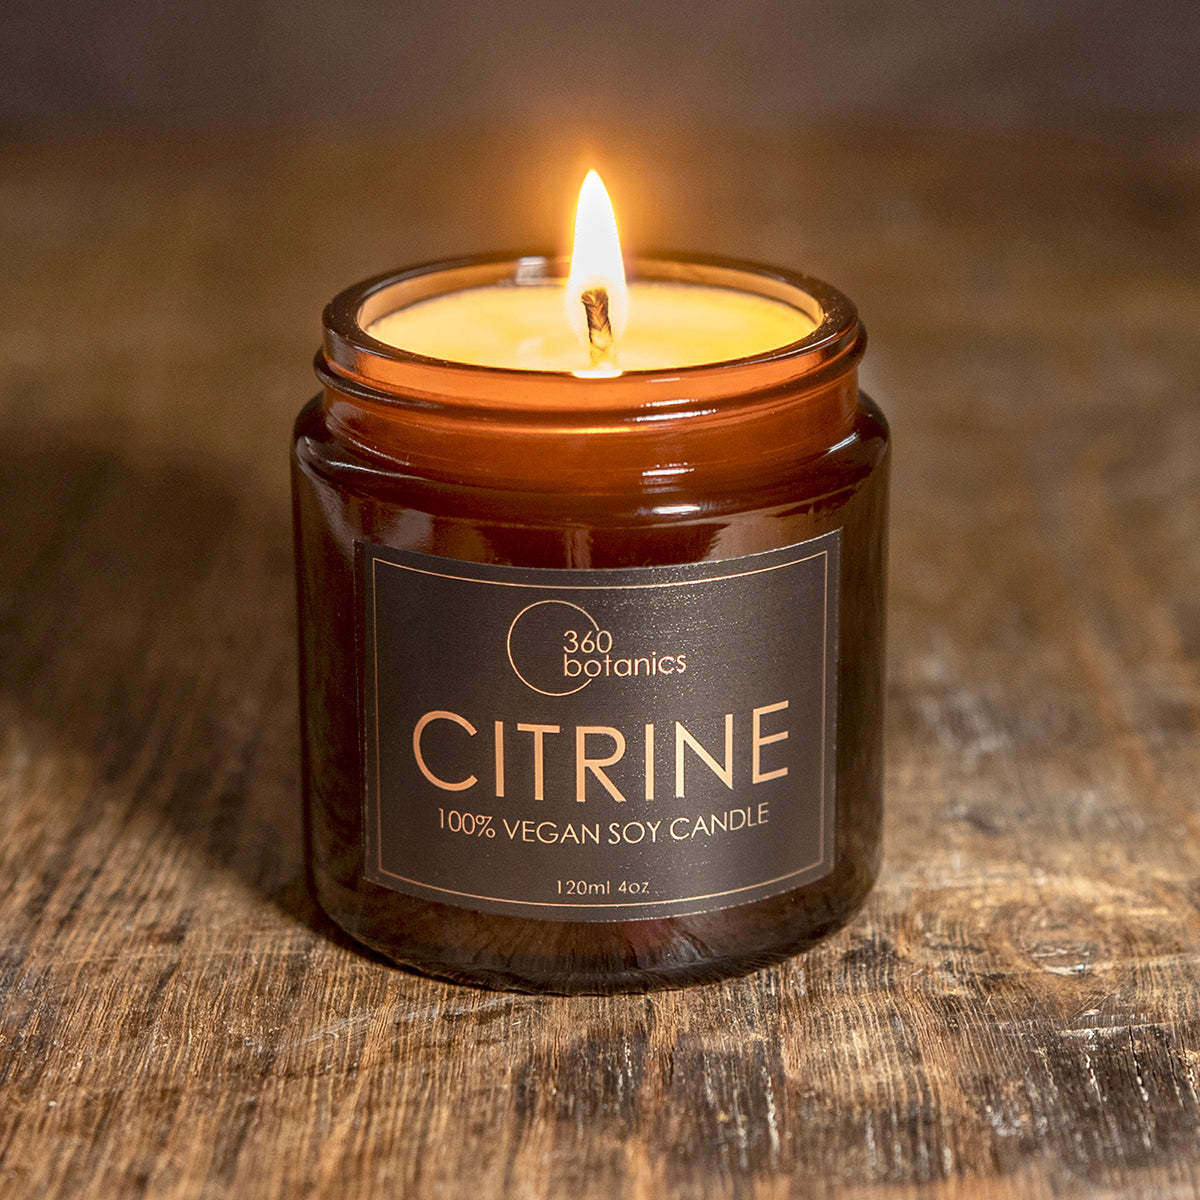 brown jar candle lit with orange flame on wooden surface